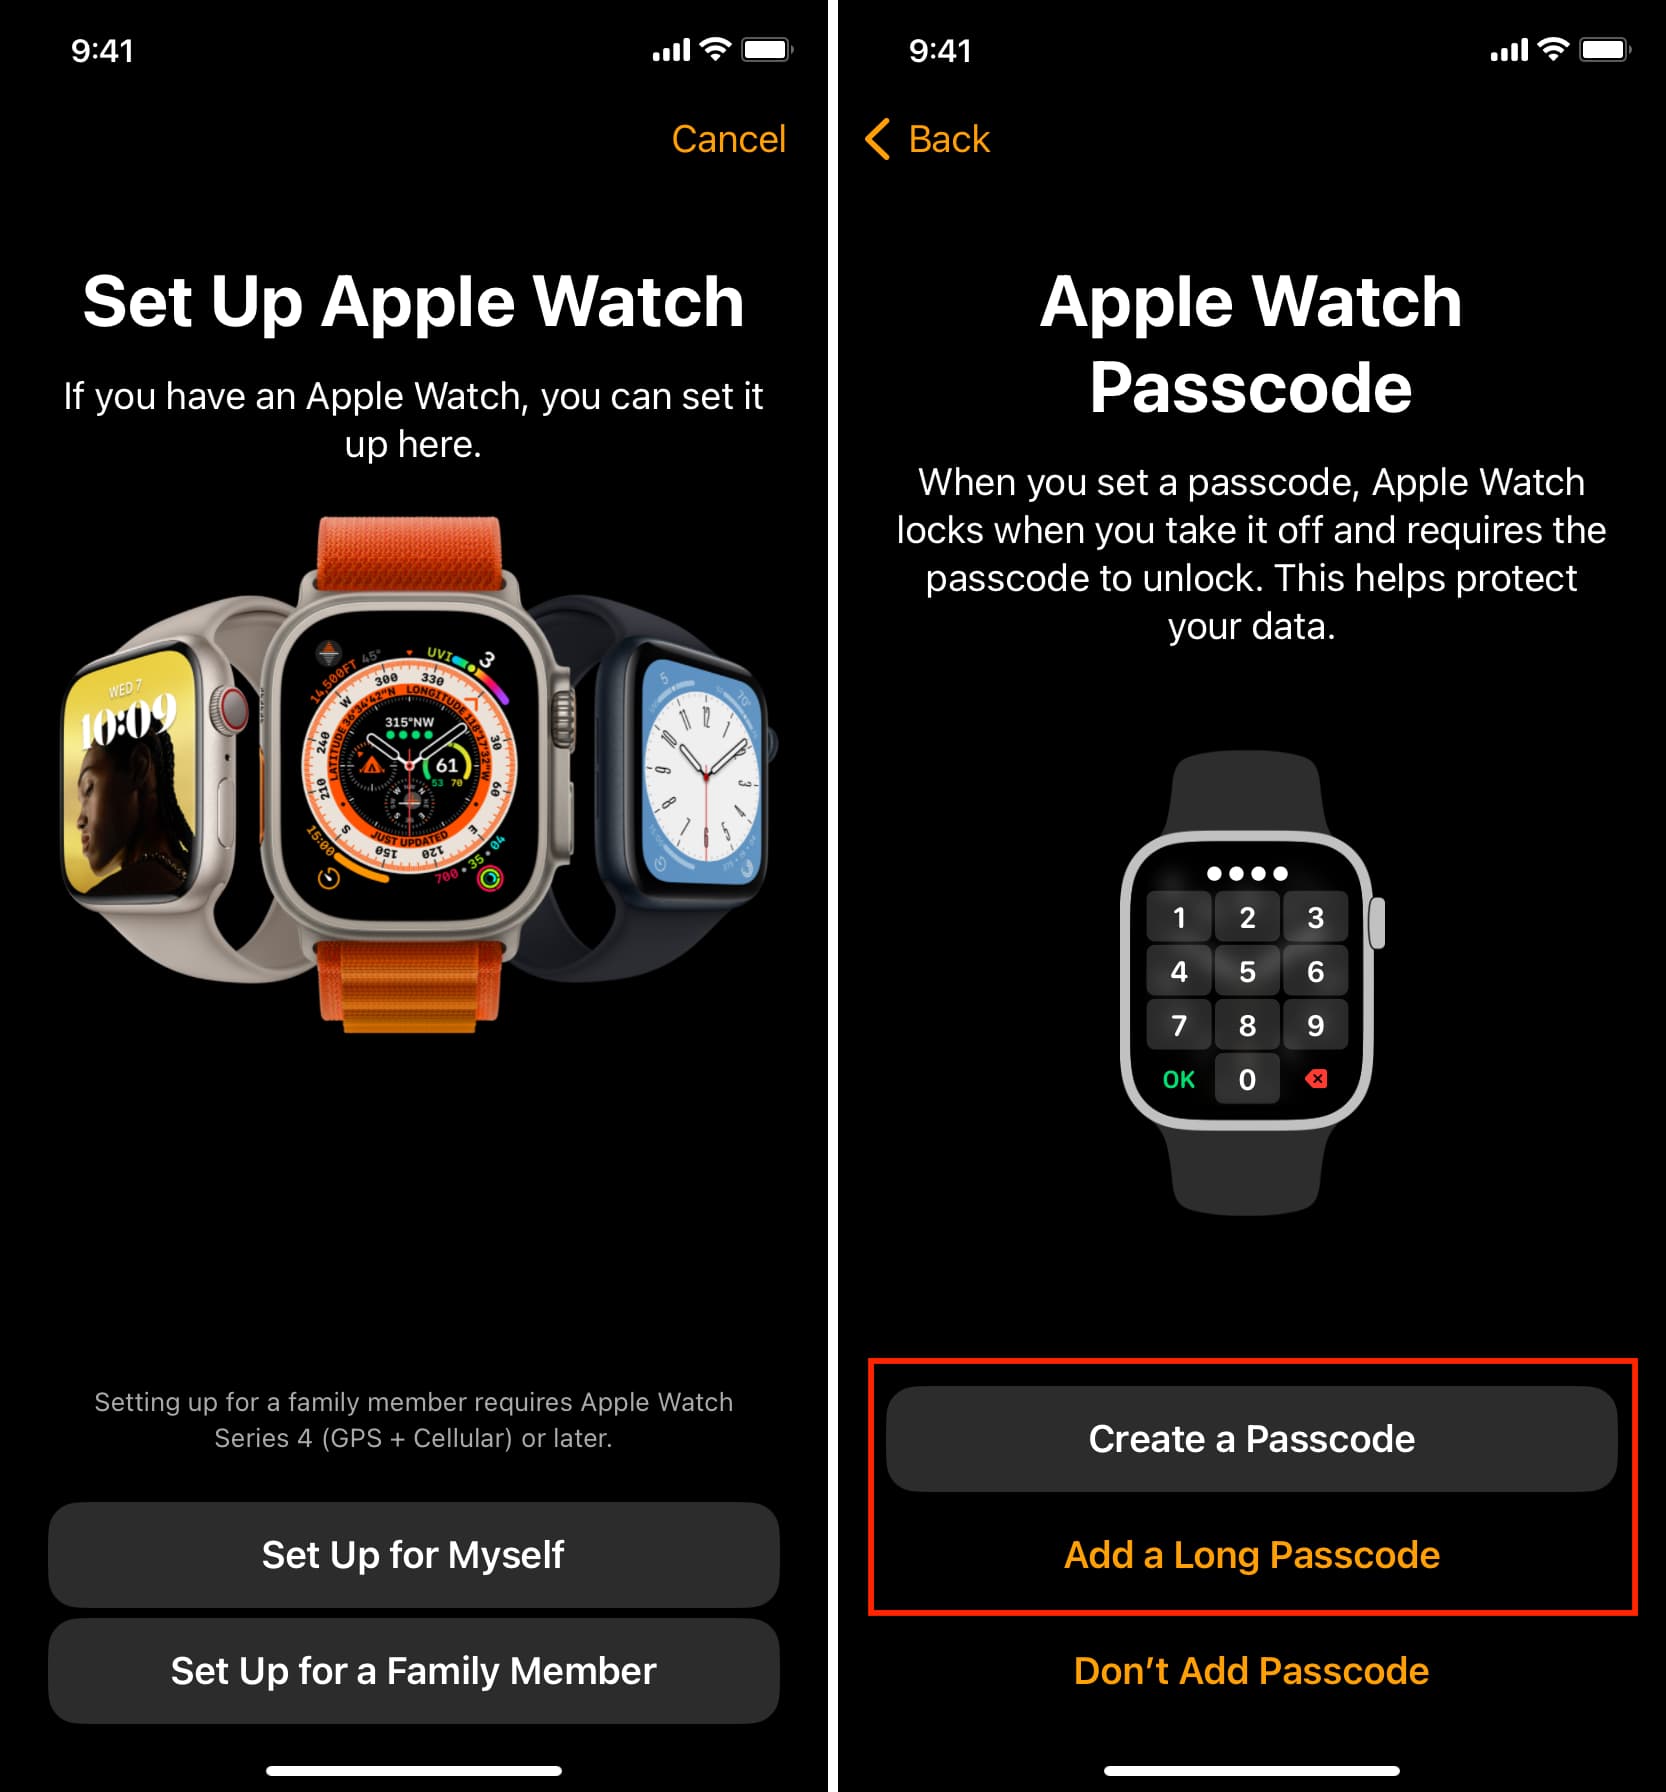 Set Up Apple Watch and create new passcode